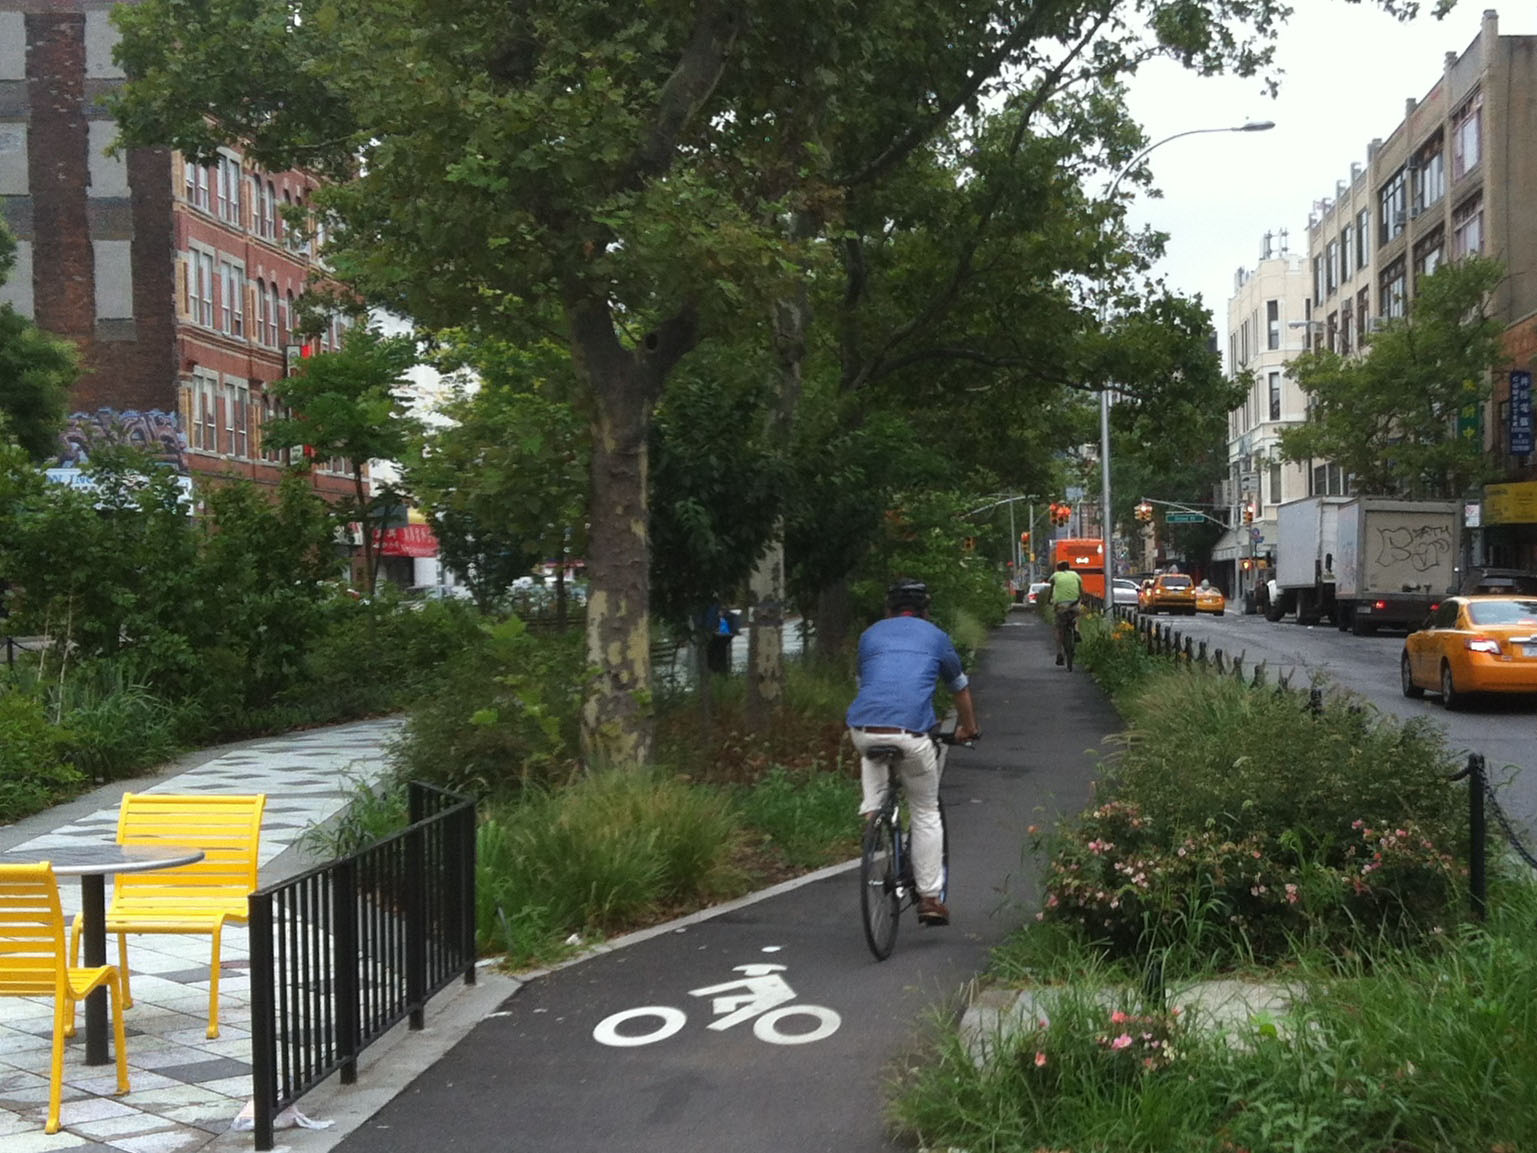 Fig. 31.18 Bike lane in the center of a boulevard in New York City.